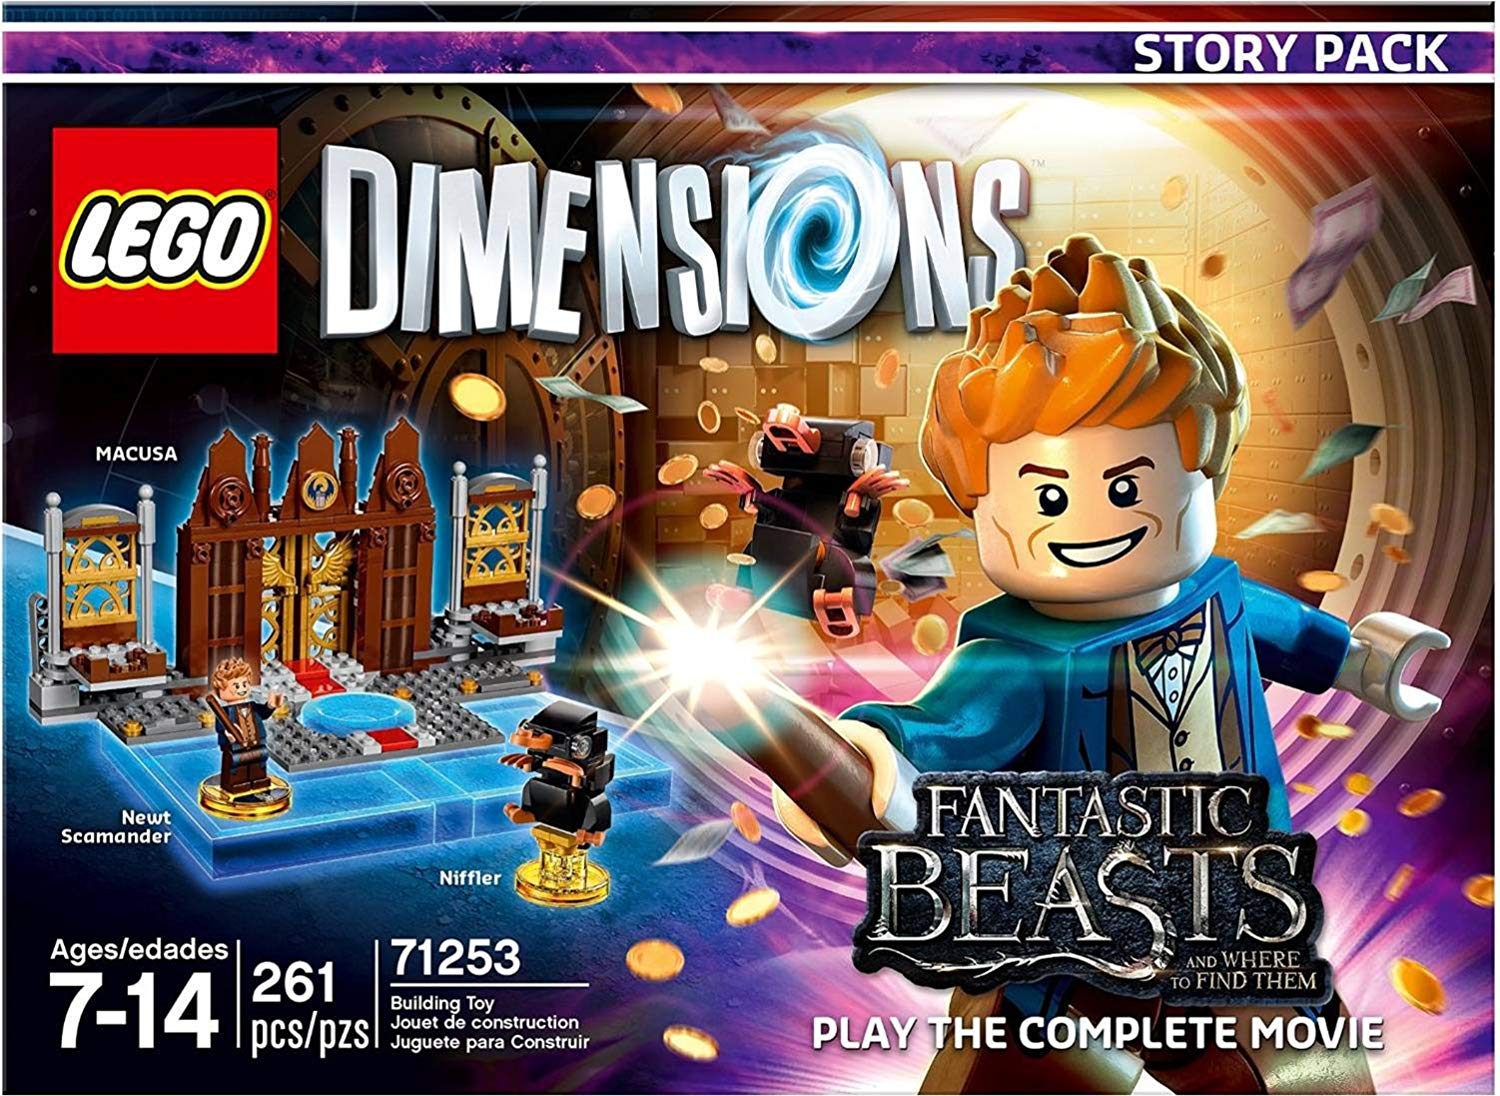 Fantastic Beasts and Where to Find Them Story Pack (71253) - Akció Figurák Lego Dimension